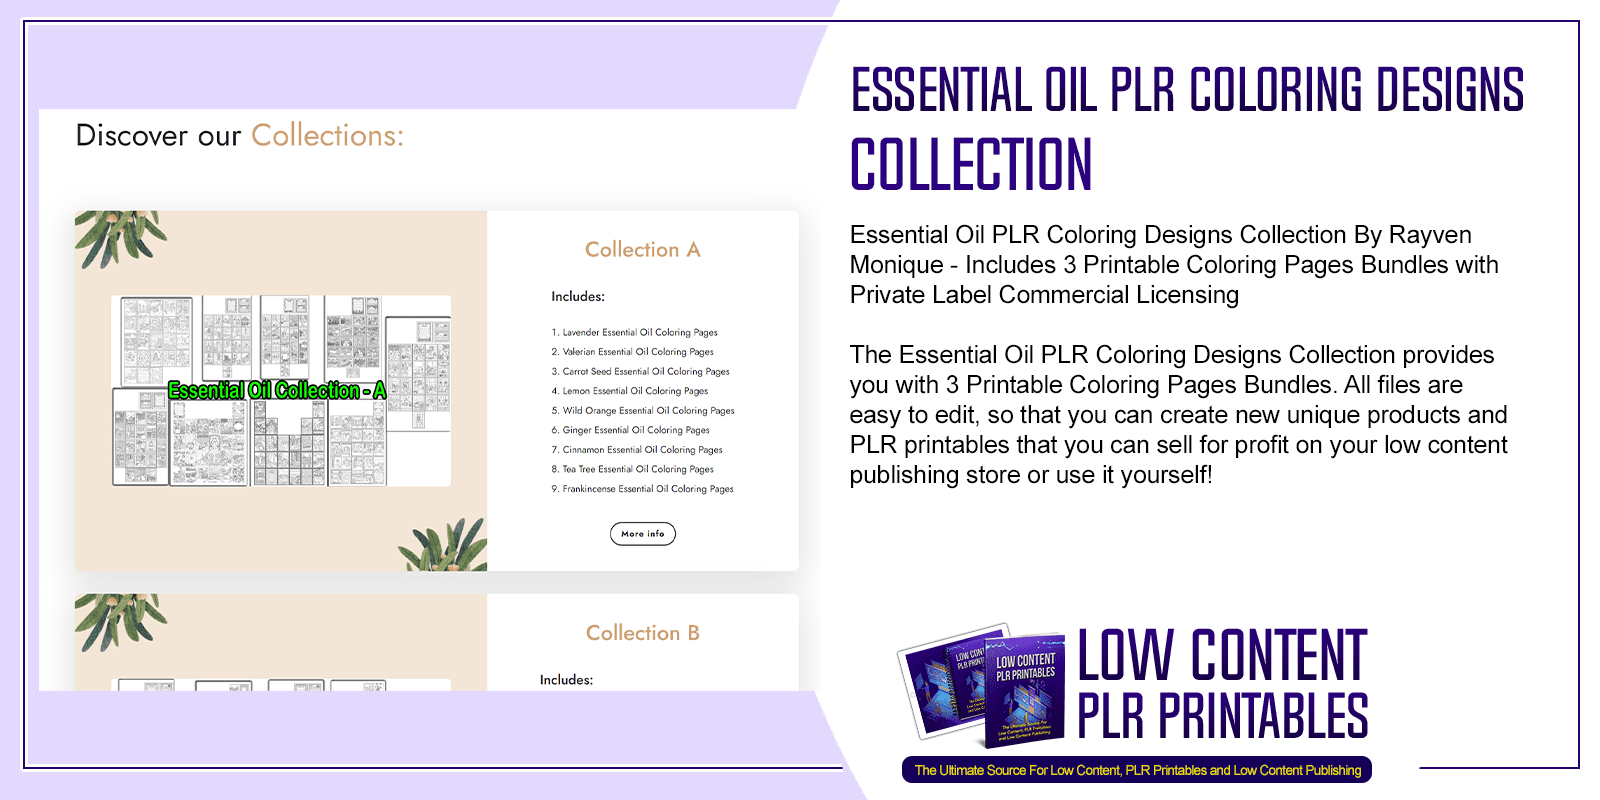 Essential Oil PLR Coloring Designs Collection